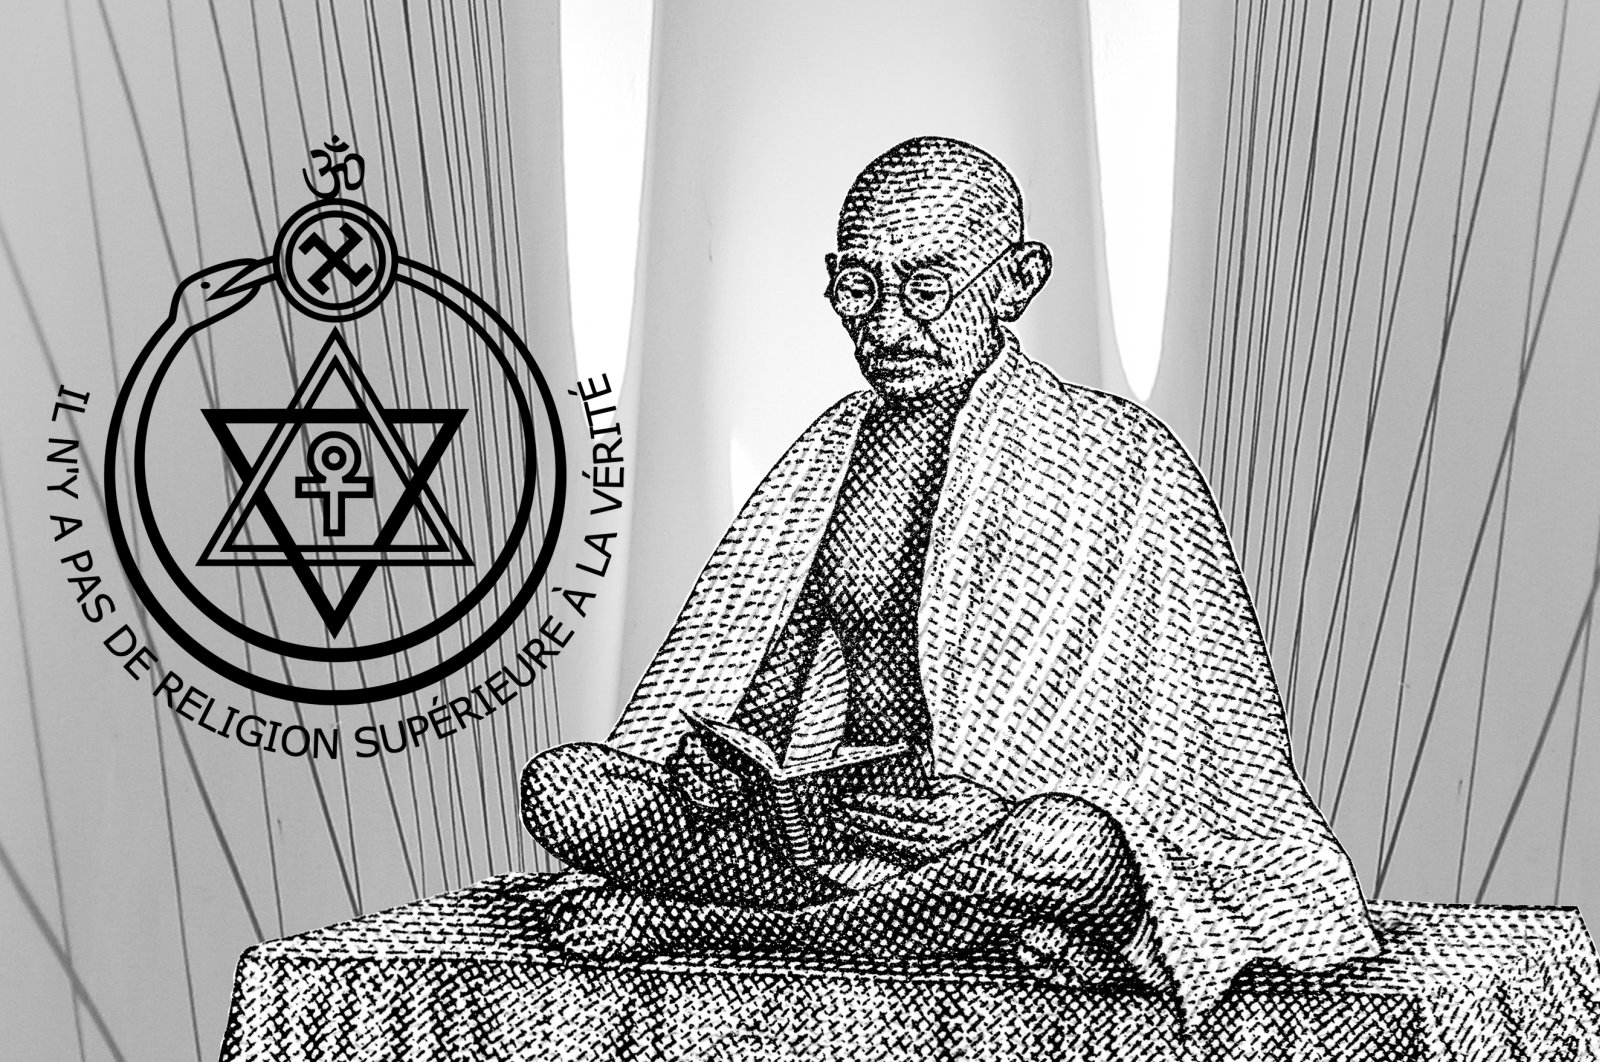 An illustration shows Mahatma Gandhi while reading a book with a seal of the Theosophical Society on the left side. (Edited By Büşra Öztürk)